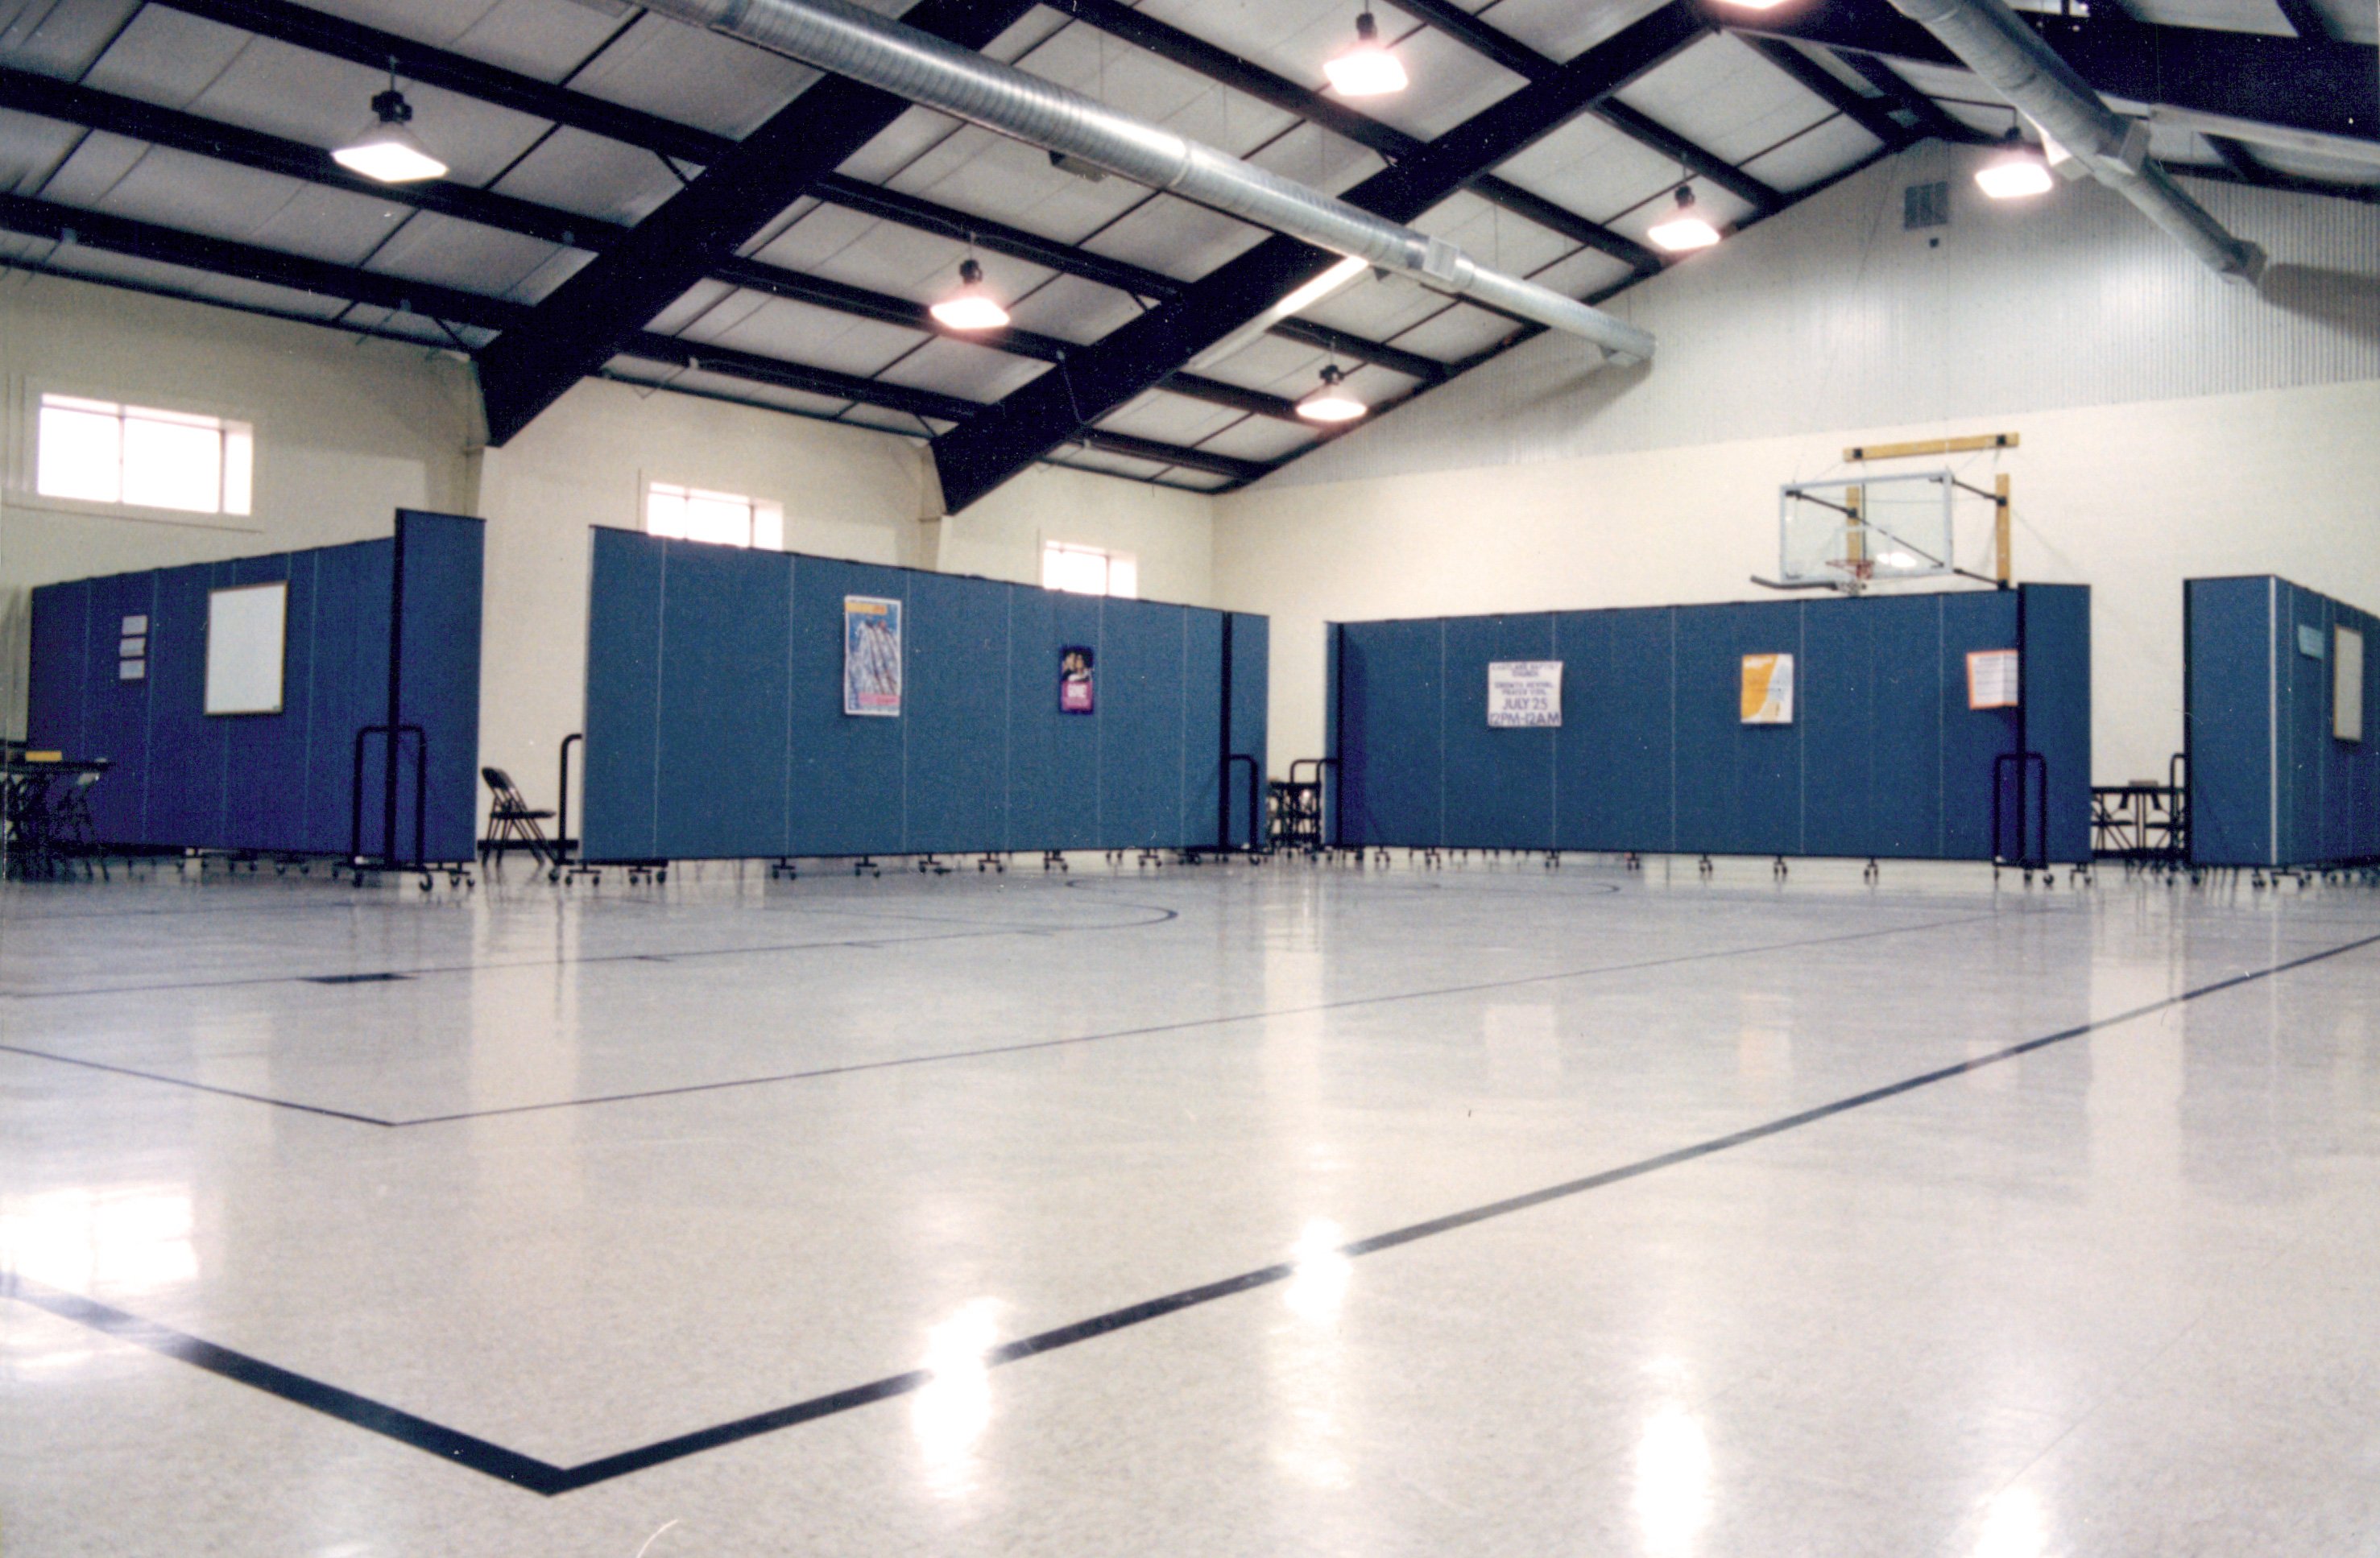 Even this cavernous gym can be easily subdivided for class or other use with acoustical portable walls